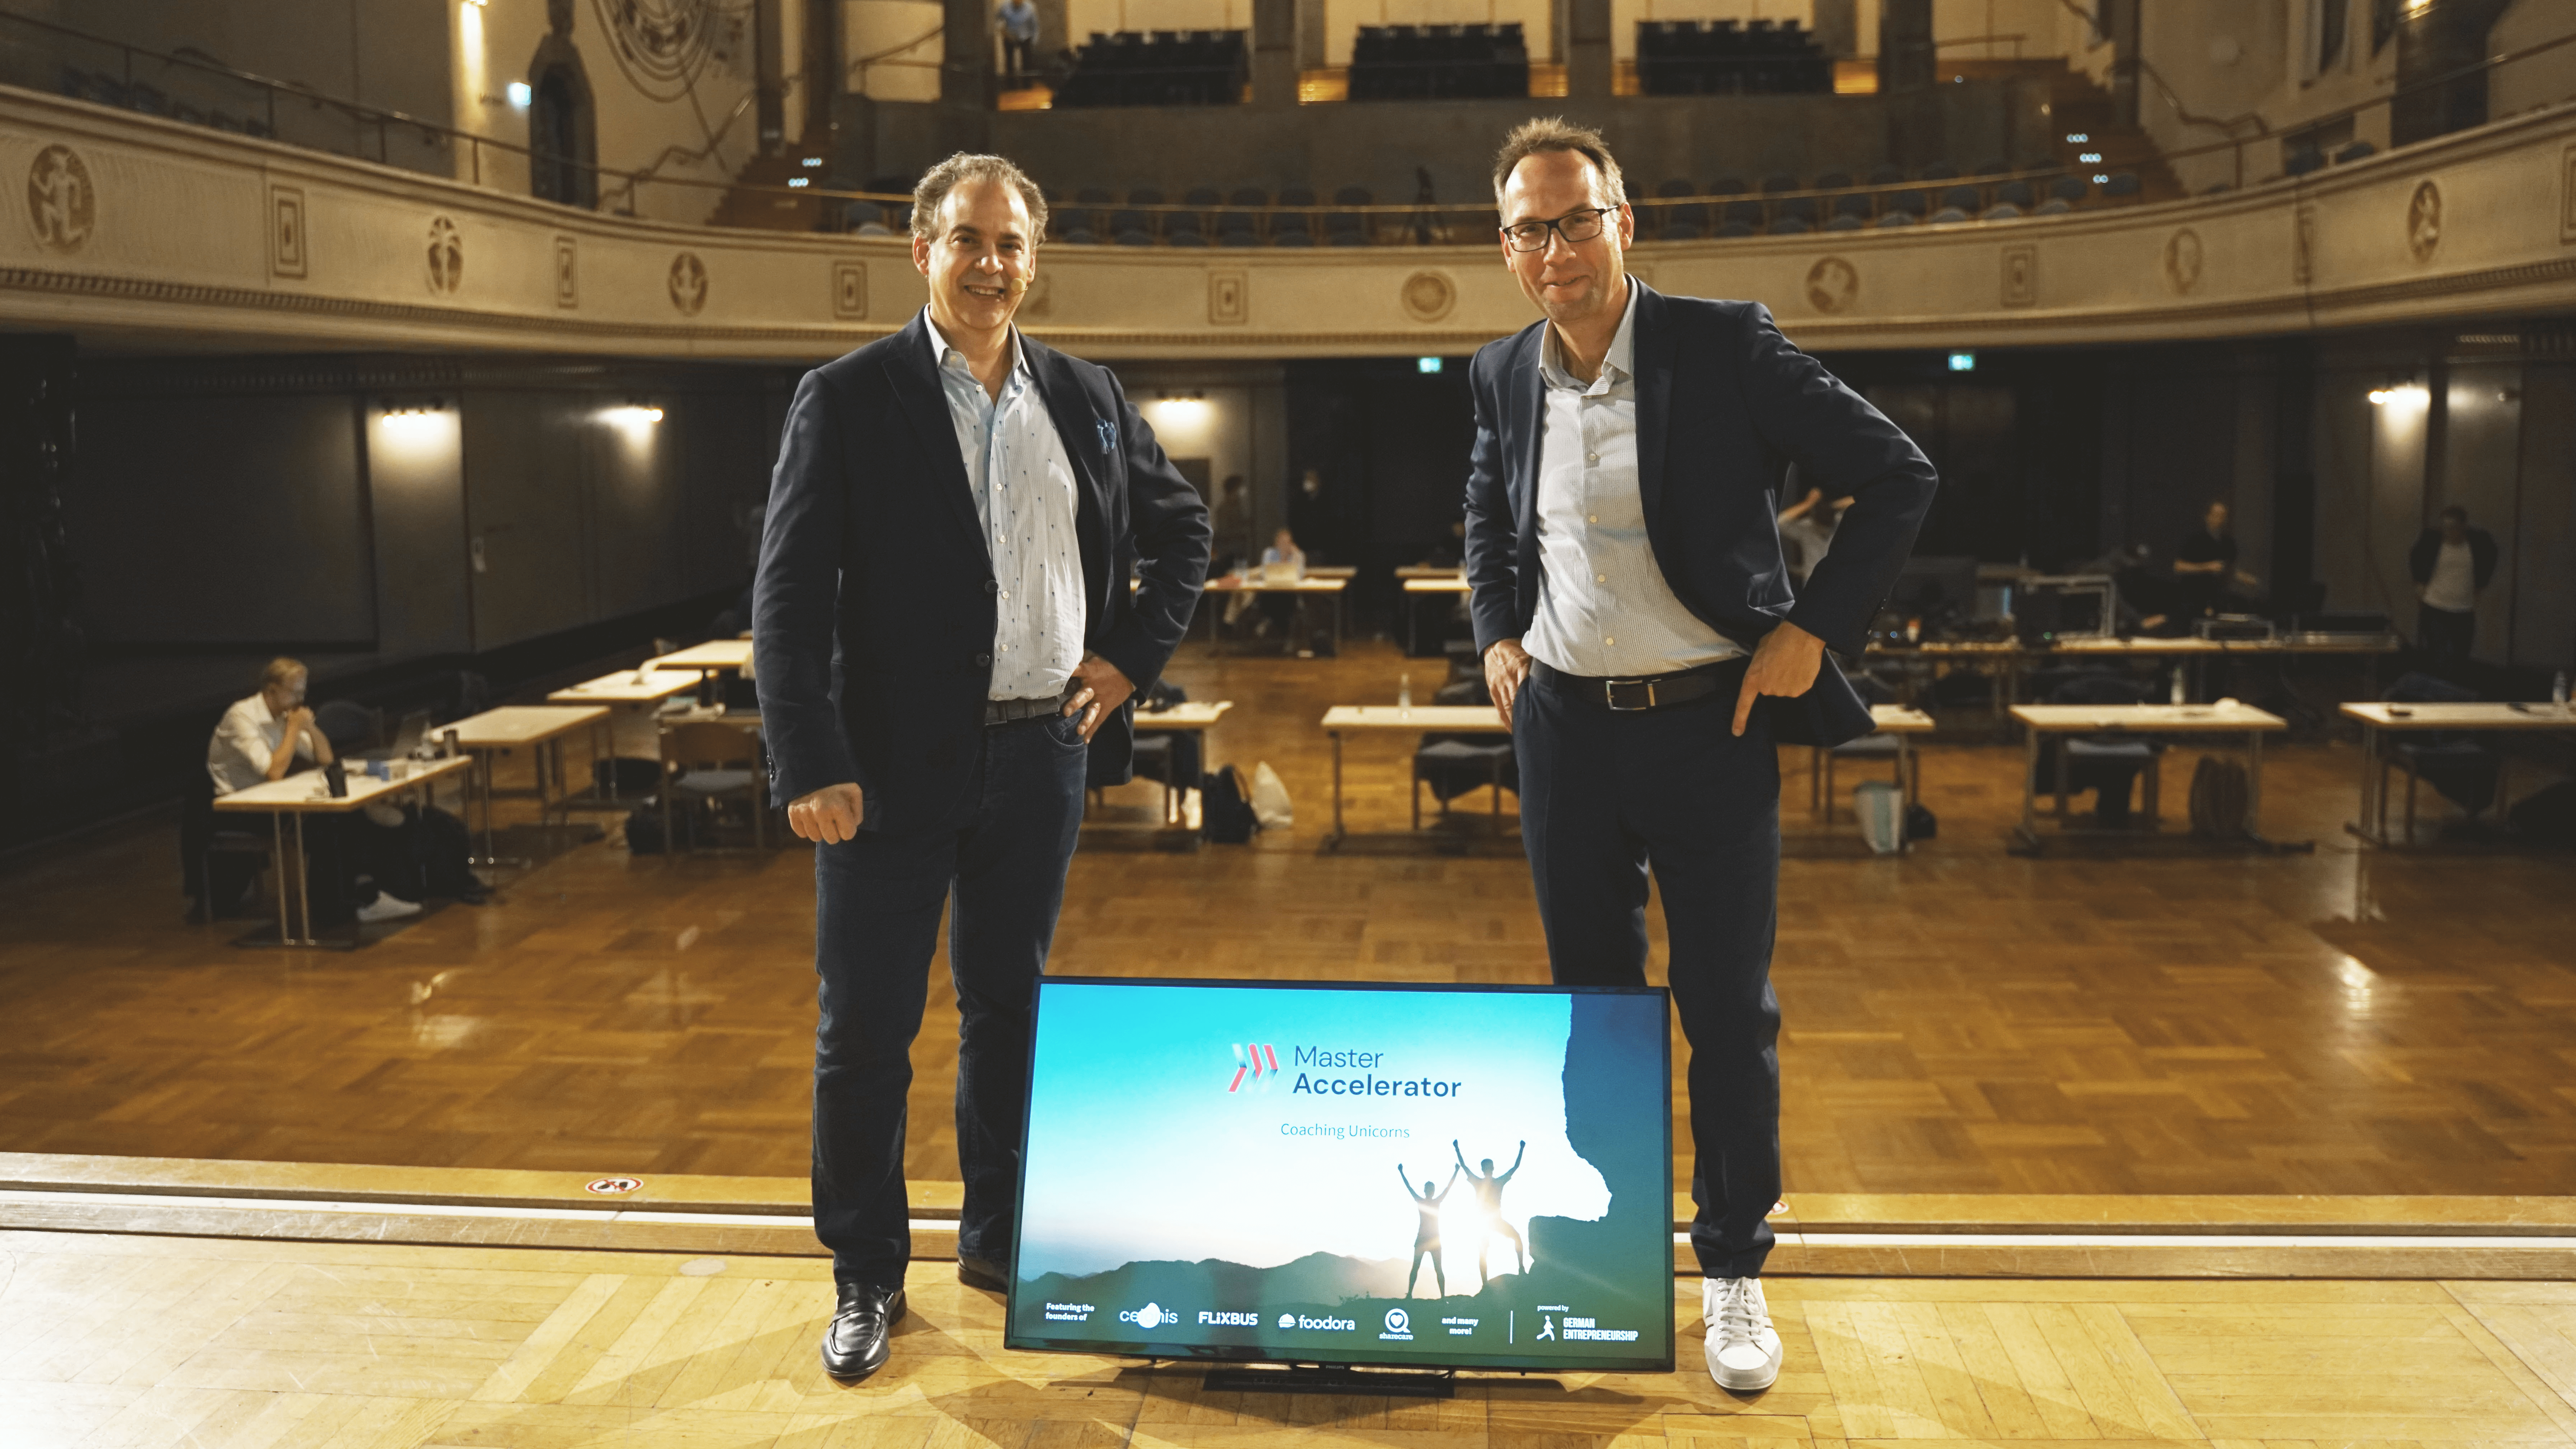 Andy Goldstein and Matthias Notz present Master Accelerator